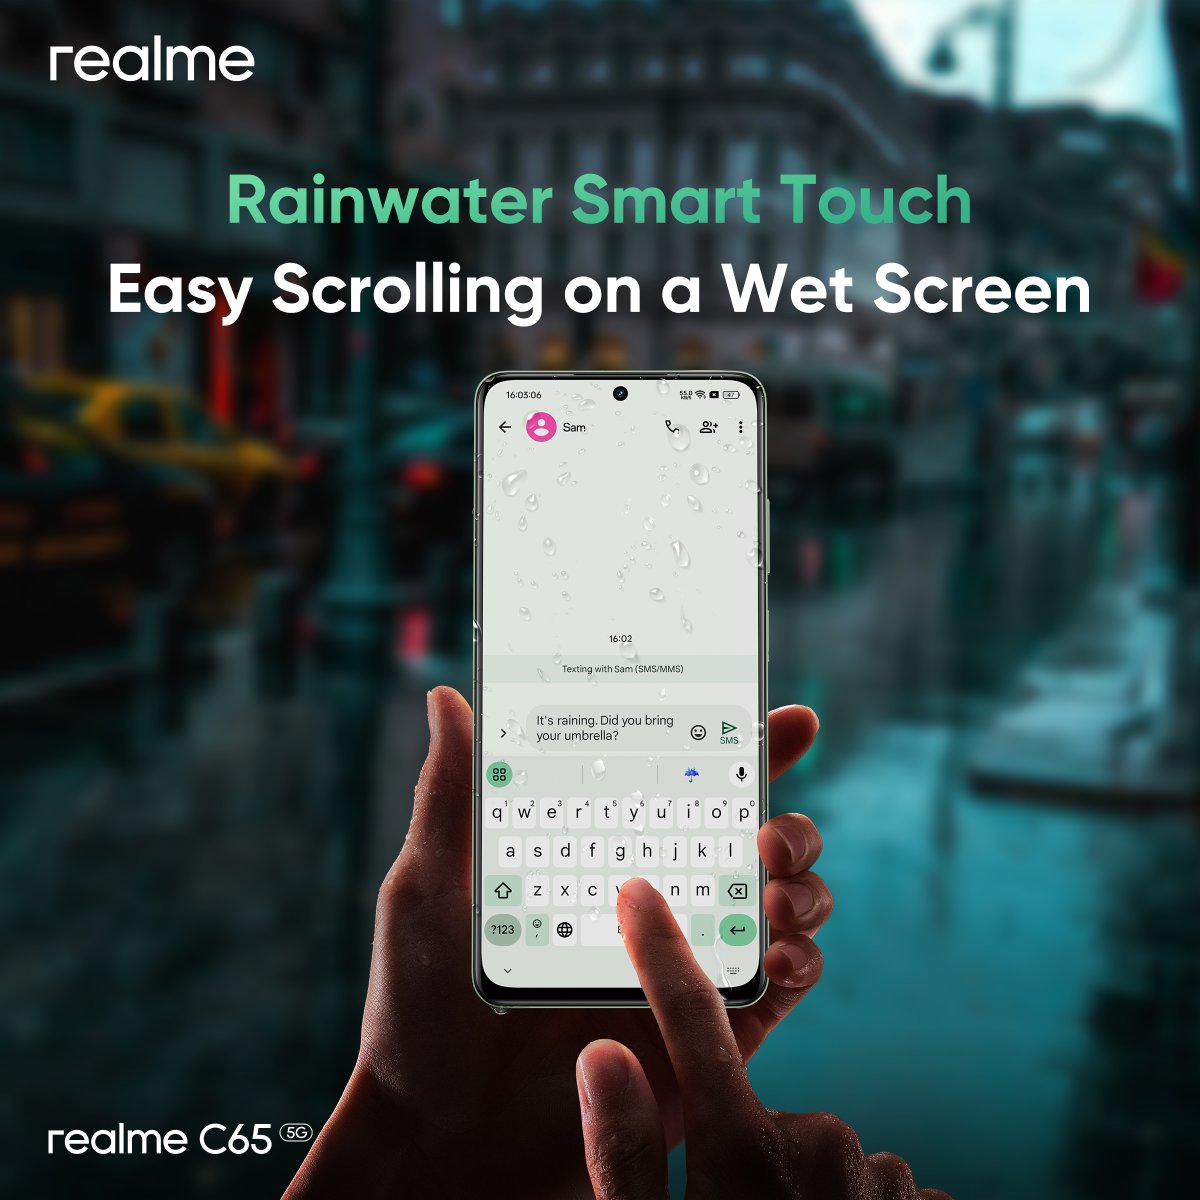 The champions are always on top of their game with smooth performance even under rainfalls. The rainwater smart touch of #realmeC65 5G is going to revolutionize your smartphone experience Shop here: bit.ly/49WcwaS